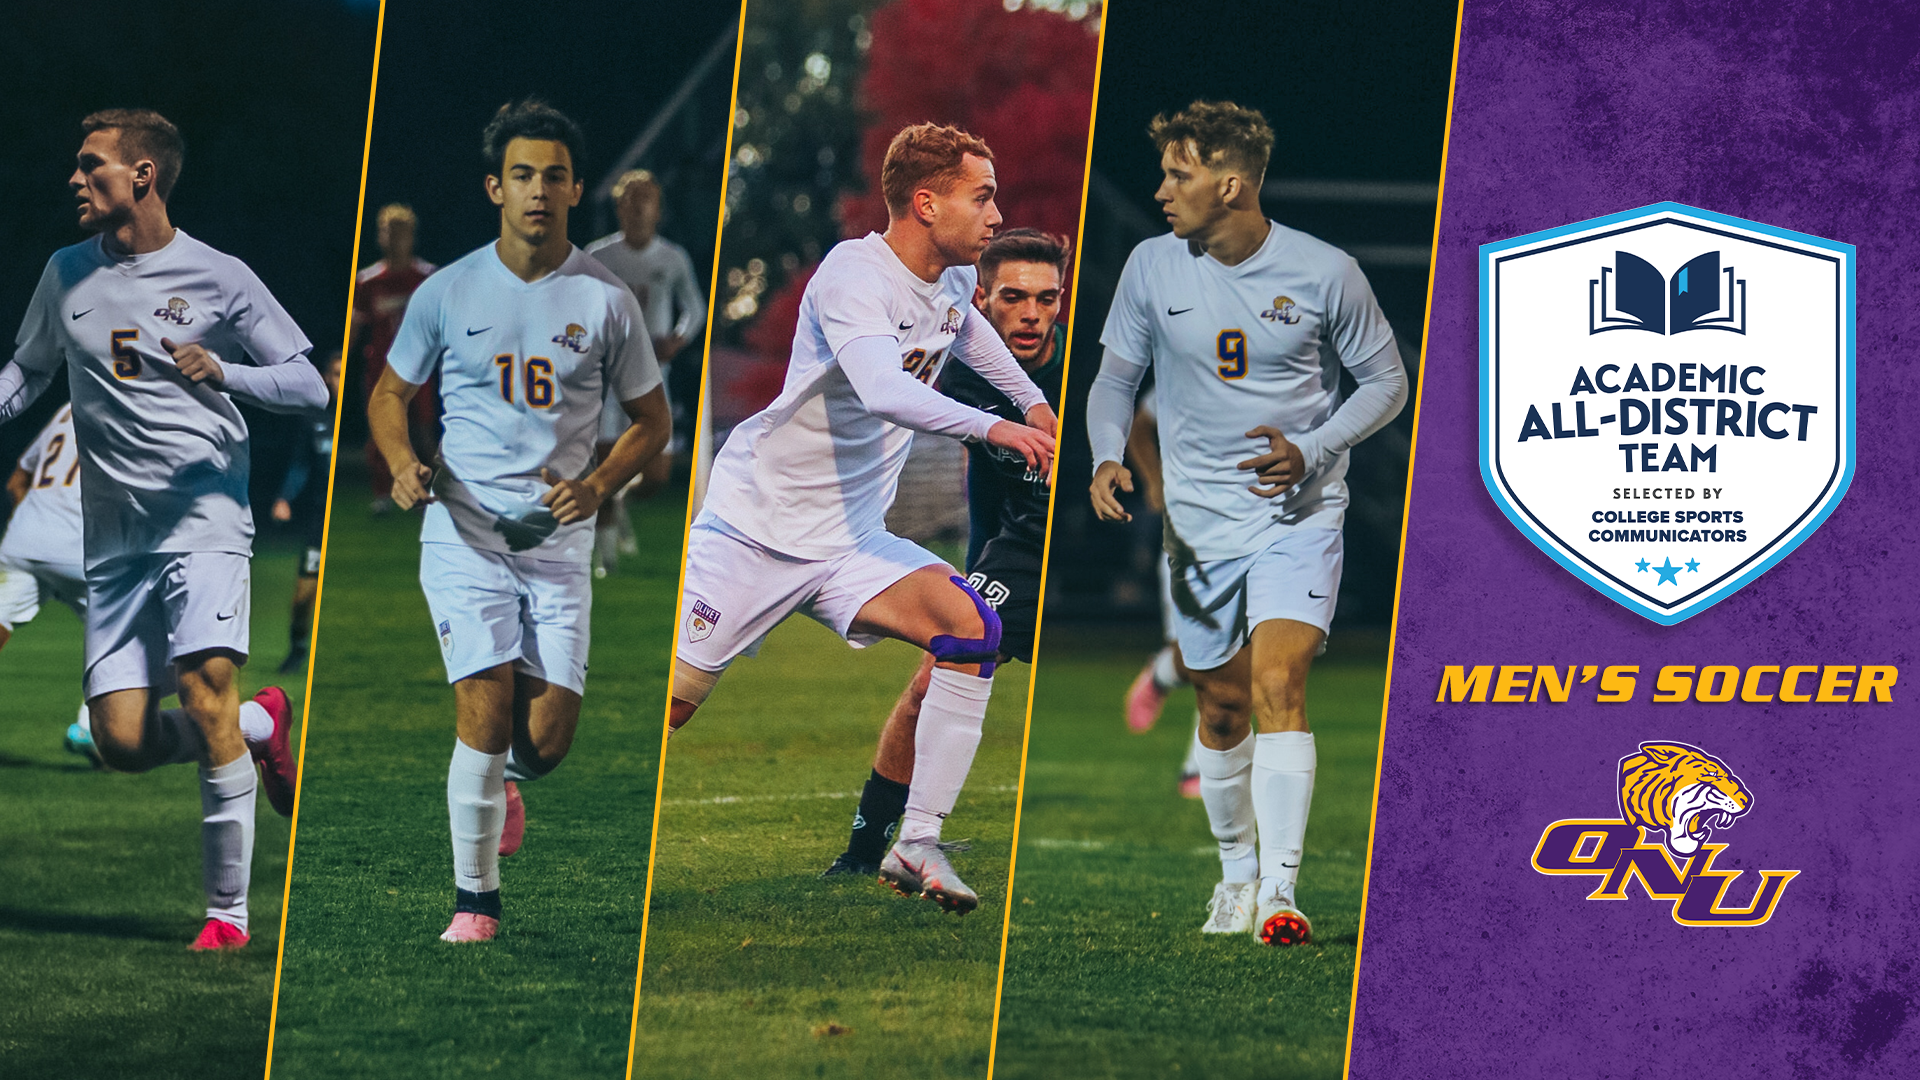 FOUR TIGERS NAMED TO COSIDA ACADEMIC ALL-DISTRICT MEN’S SOCCER TEAM